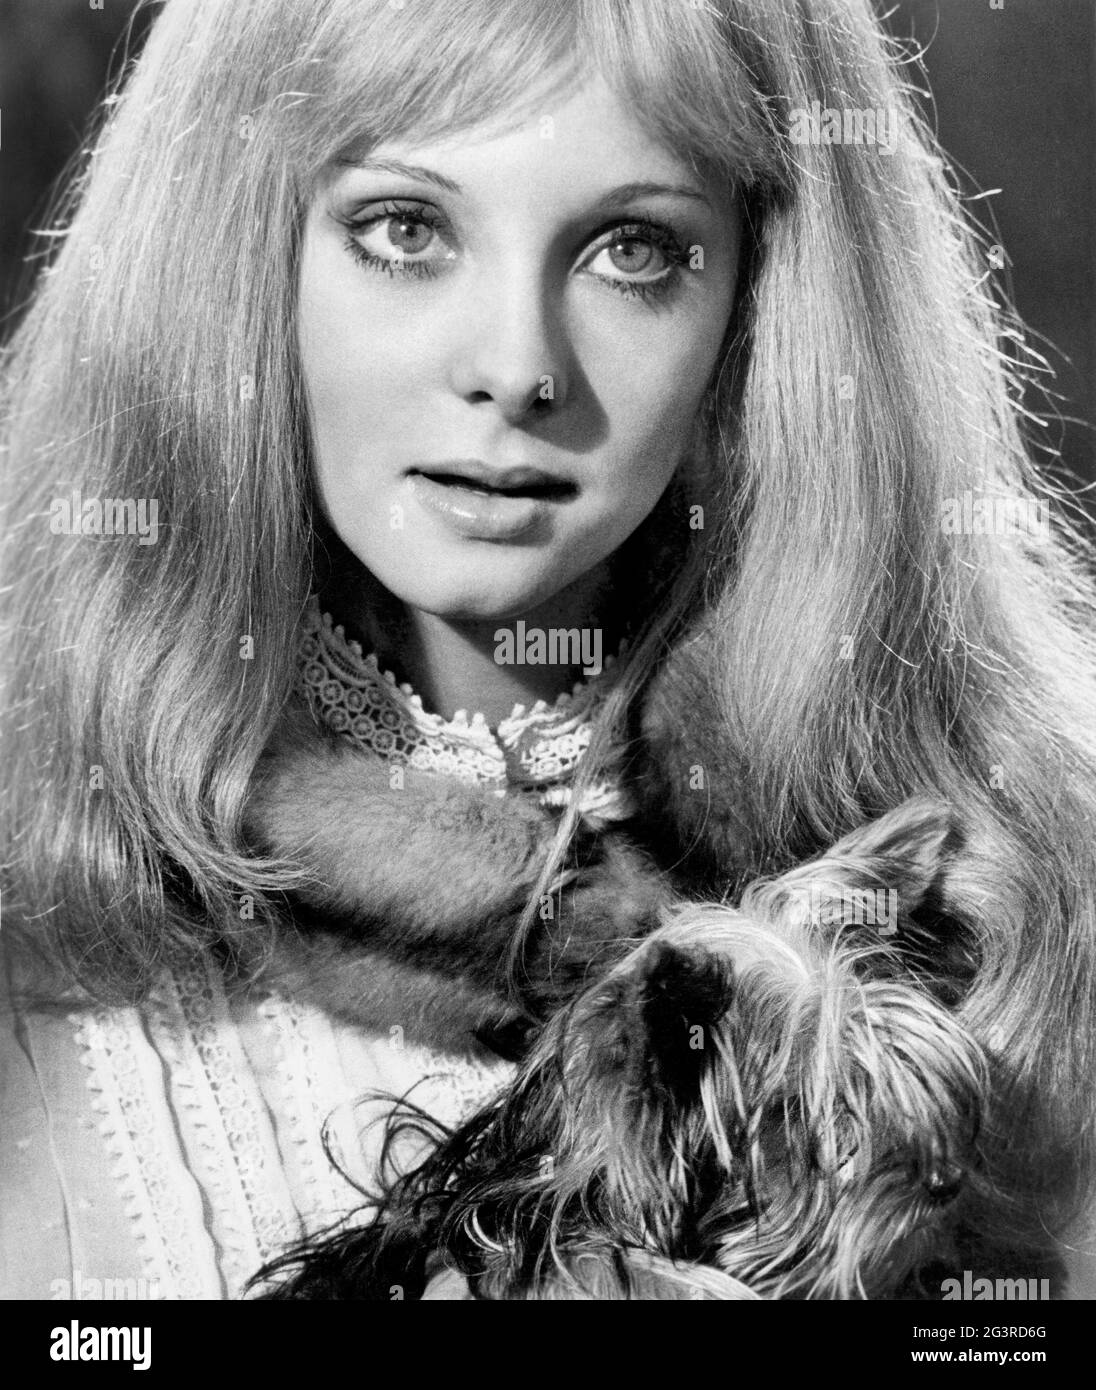 Genevieve Waite, Head and Shoulders Publicity Portrait, on-set of the Film, 'Move', 20th Century-Fox, 1970 Stock Photo